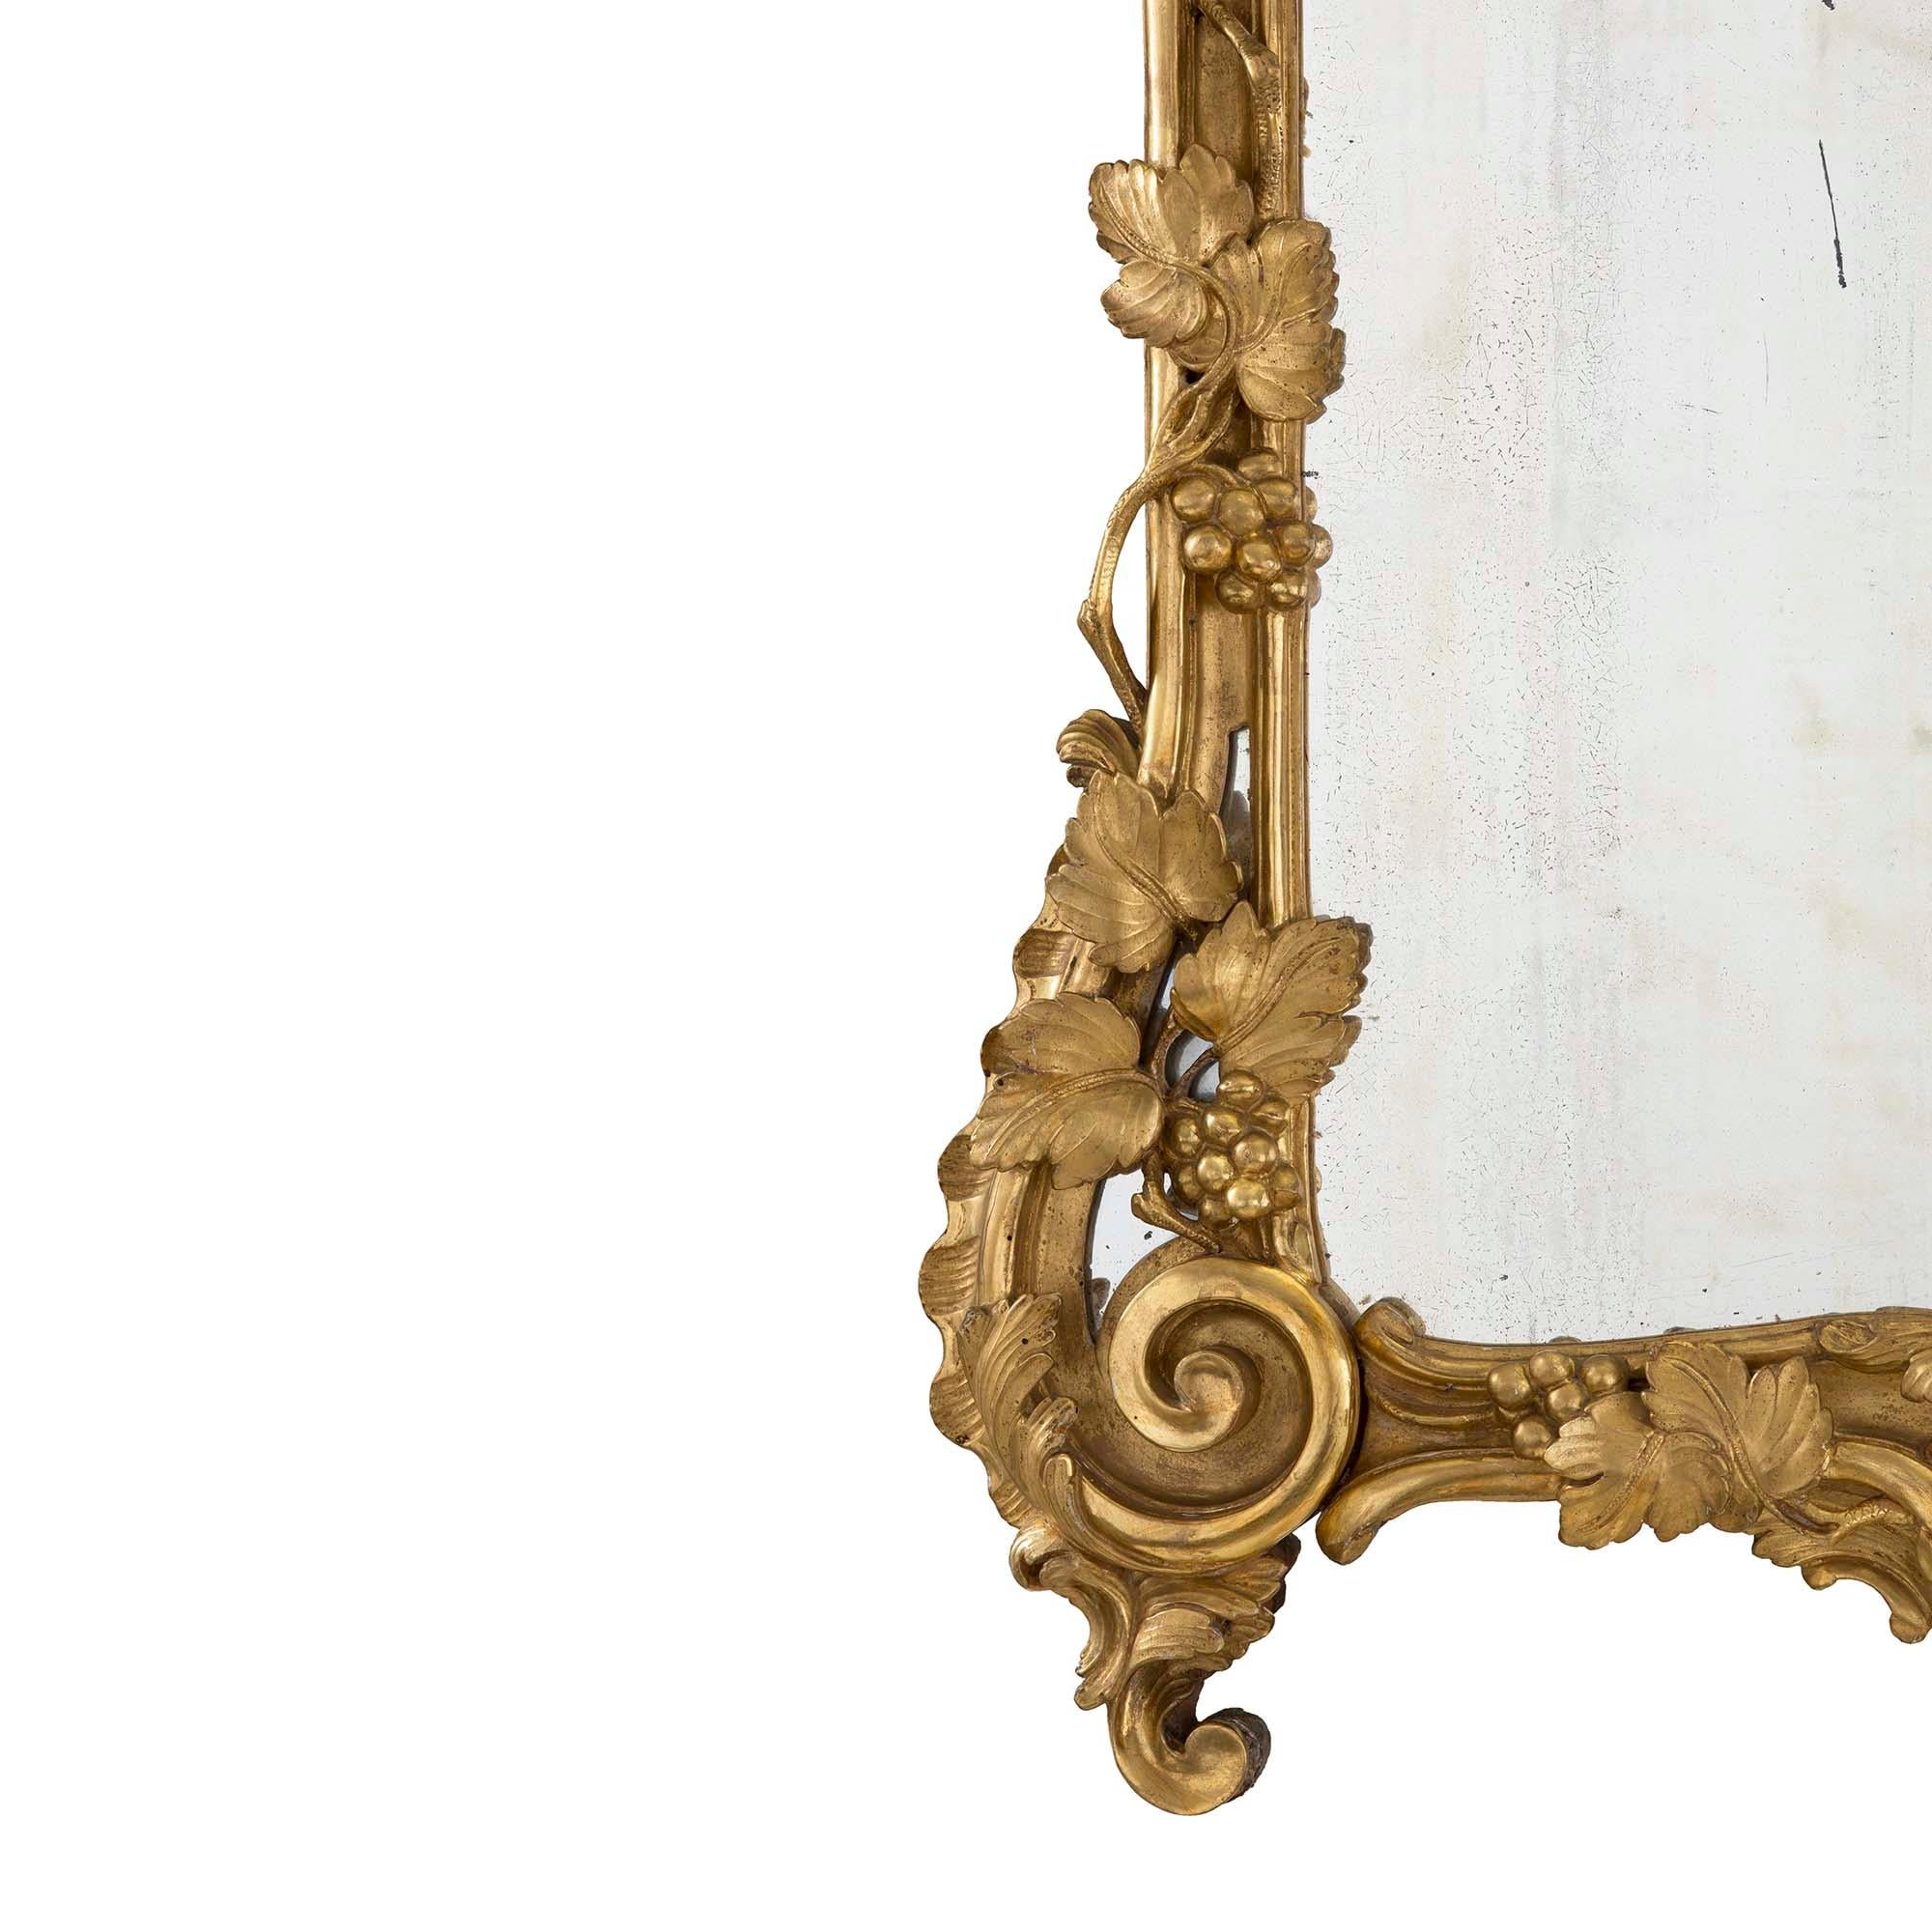 A charming French early 18th century Regence period giltwood mirror circa 1720. The original mirror plate is framed within a wonderfully detailed and richly carved giltwood border displaying beautiful scrolled movements and Fine grape leaves and